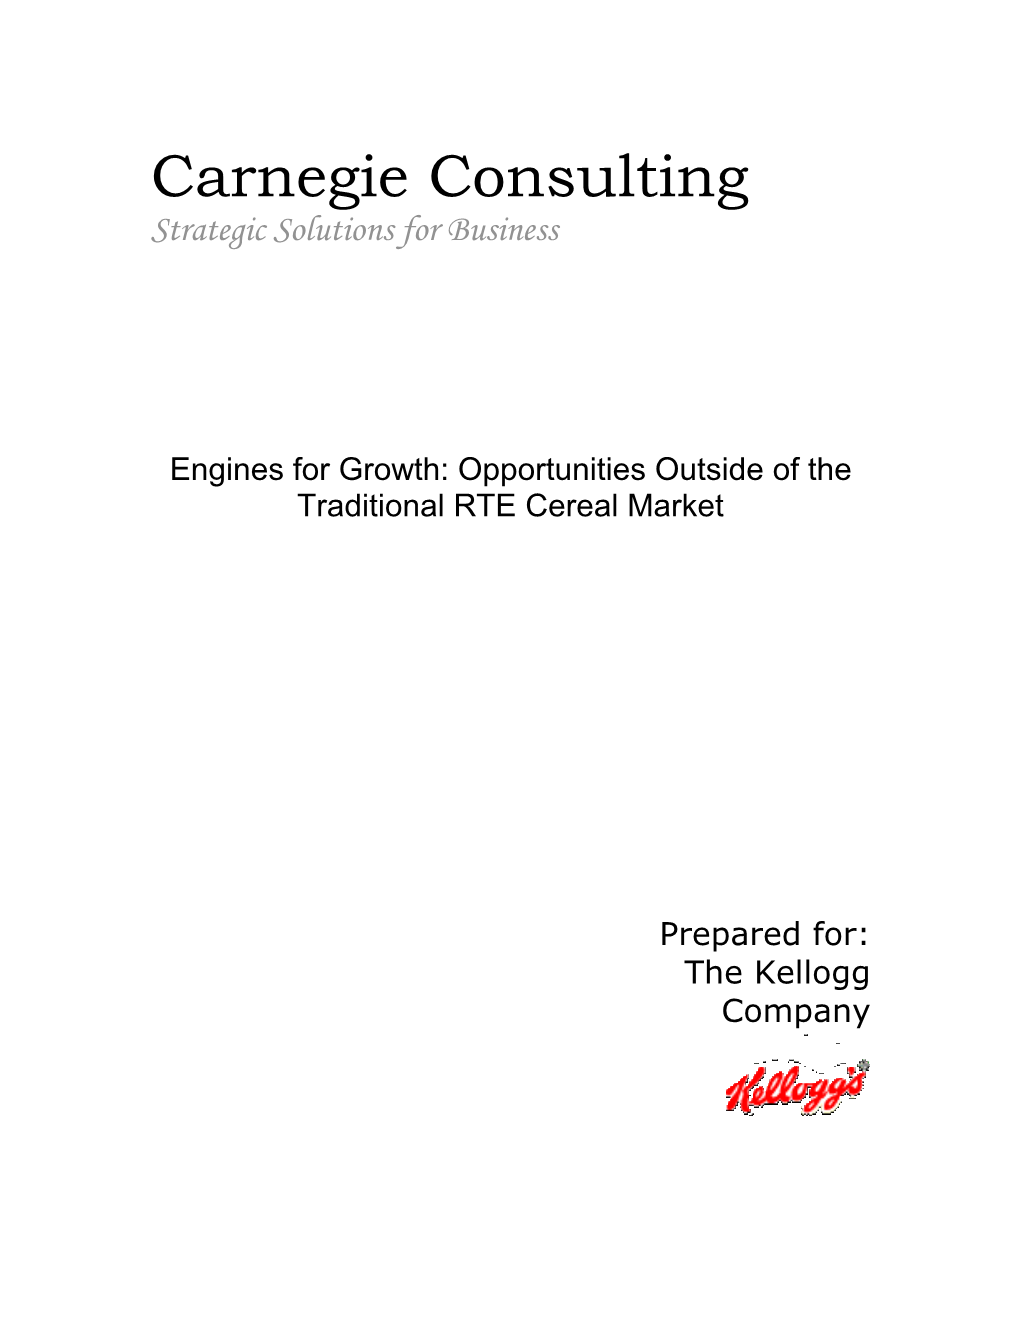 Carnegie Consulting Strategic Solutions for Business